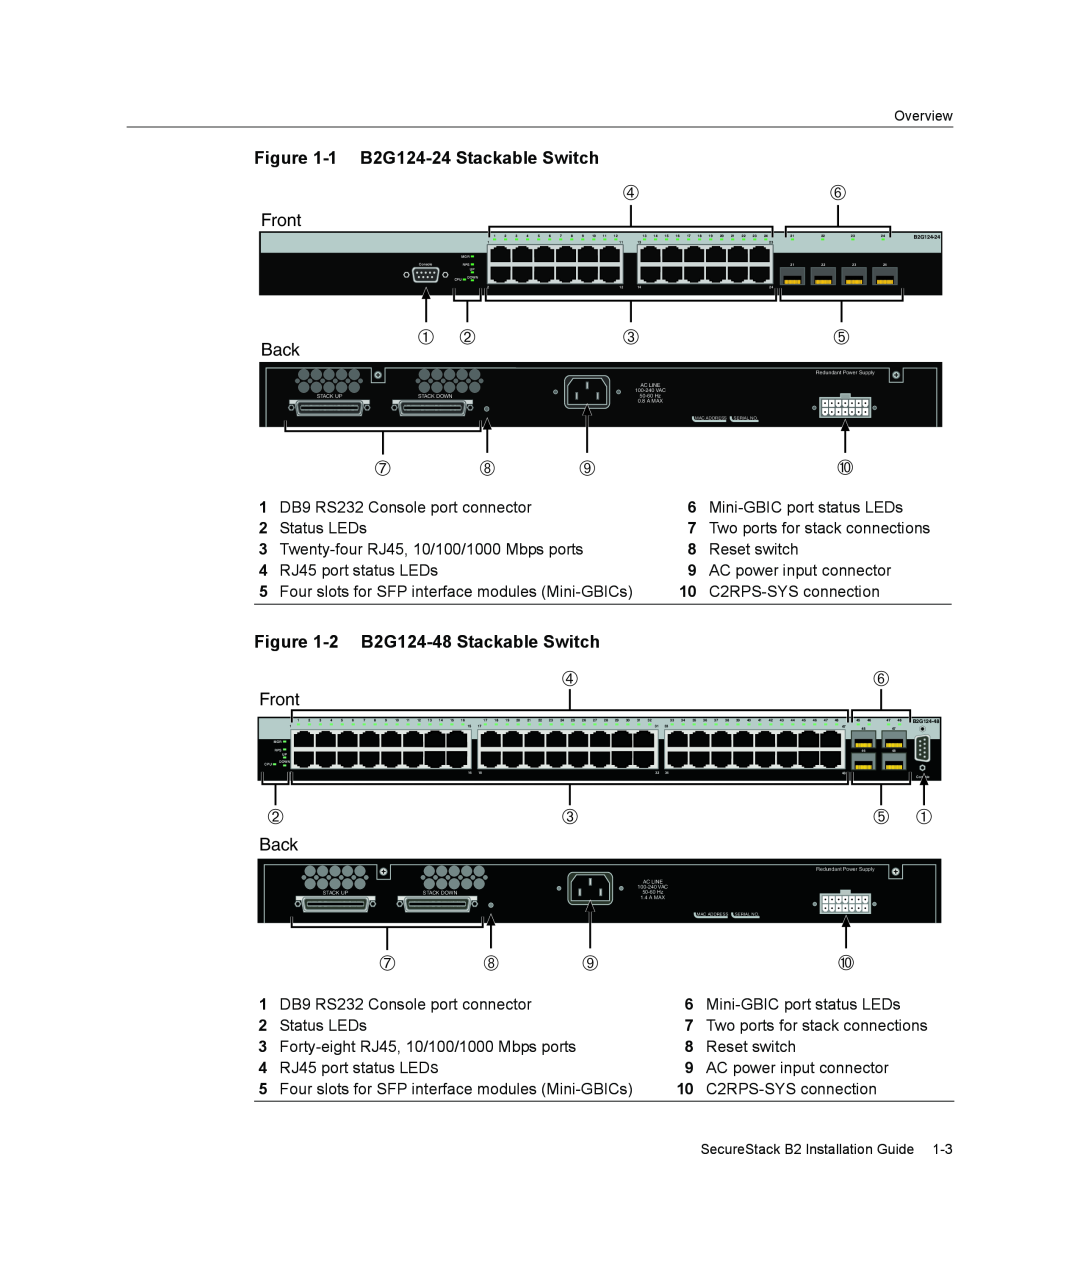 Enterasys Networks manual 1 B2G124-24 Stackable Switch, 2 B2G124-48 Stackable Switch 